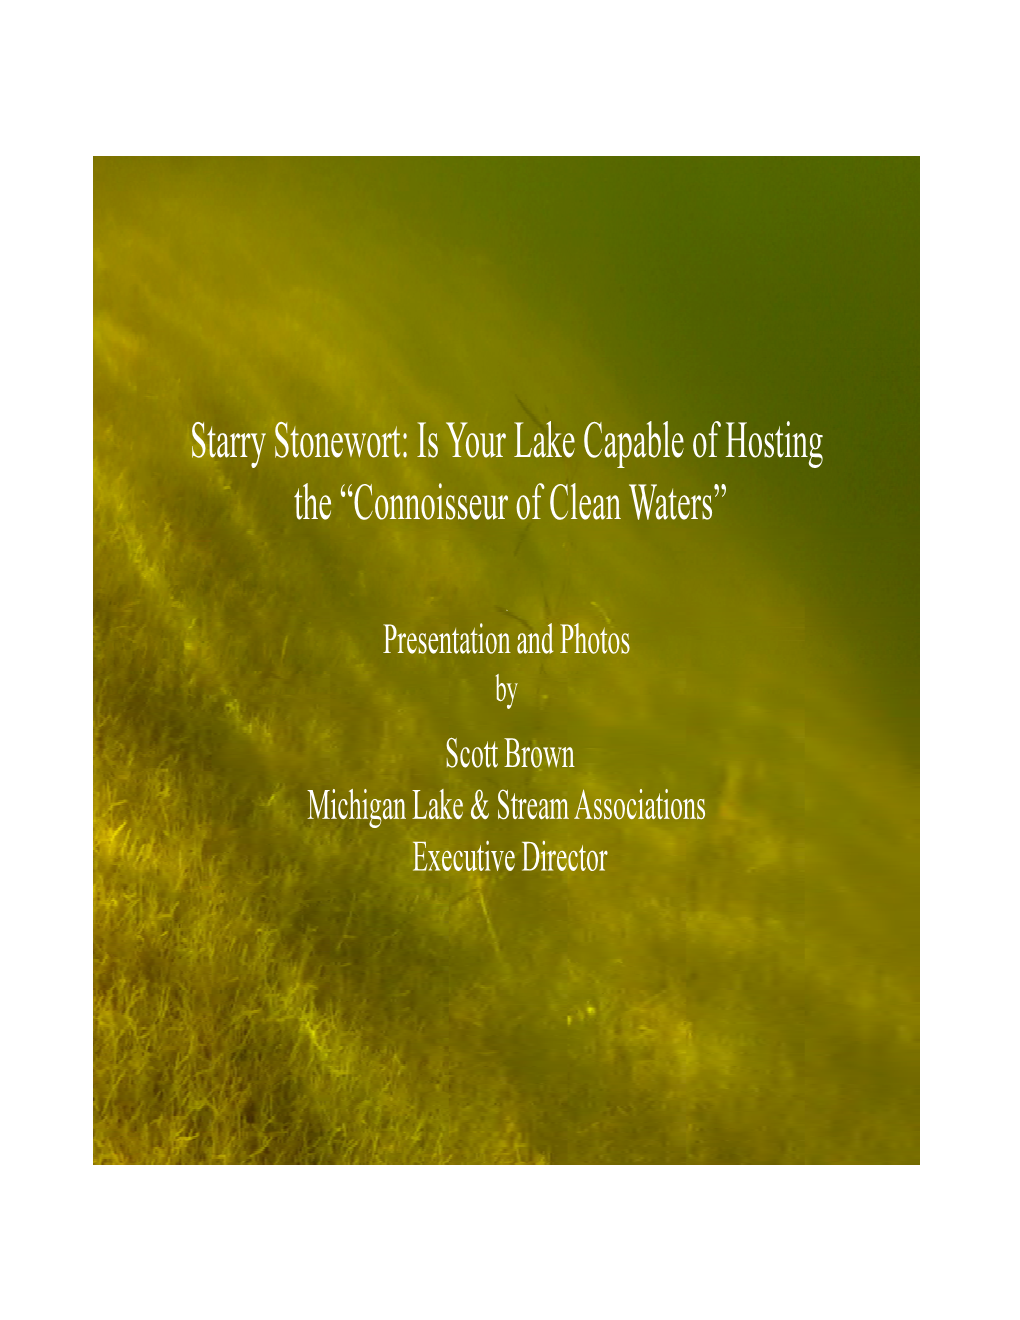 Starry Stonewort: Is Your Lake Capable of Hosting the “Connoisseur of Clean Waters”